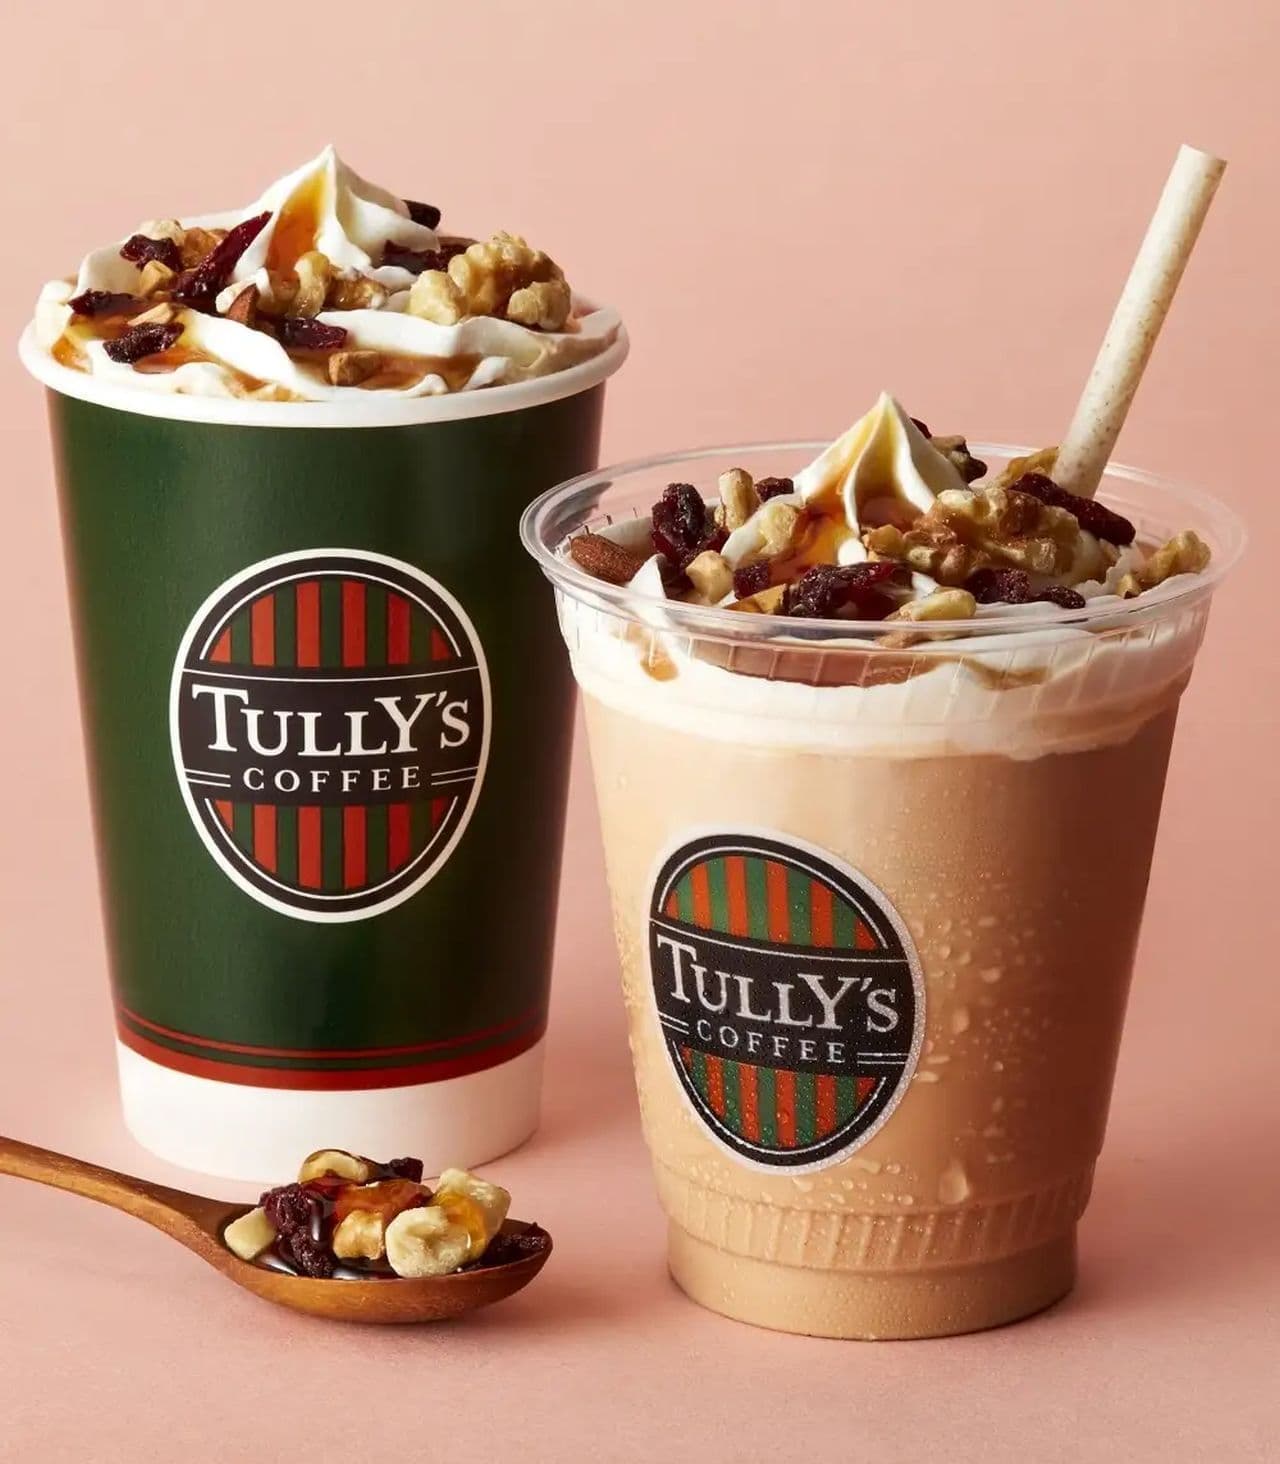 Tully's Coffee "& TEA Royal Milk Tea with Nuts and Maple